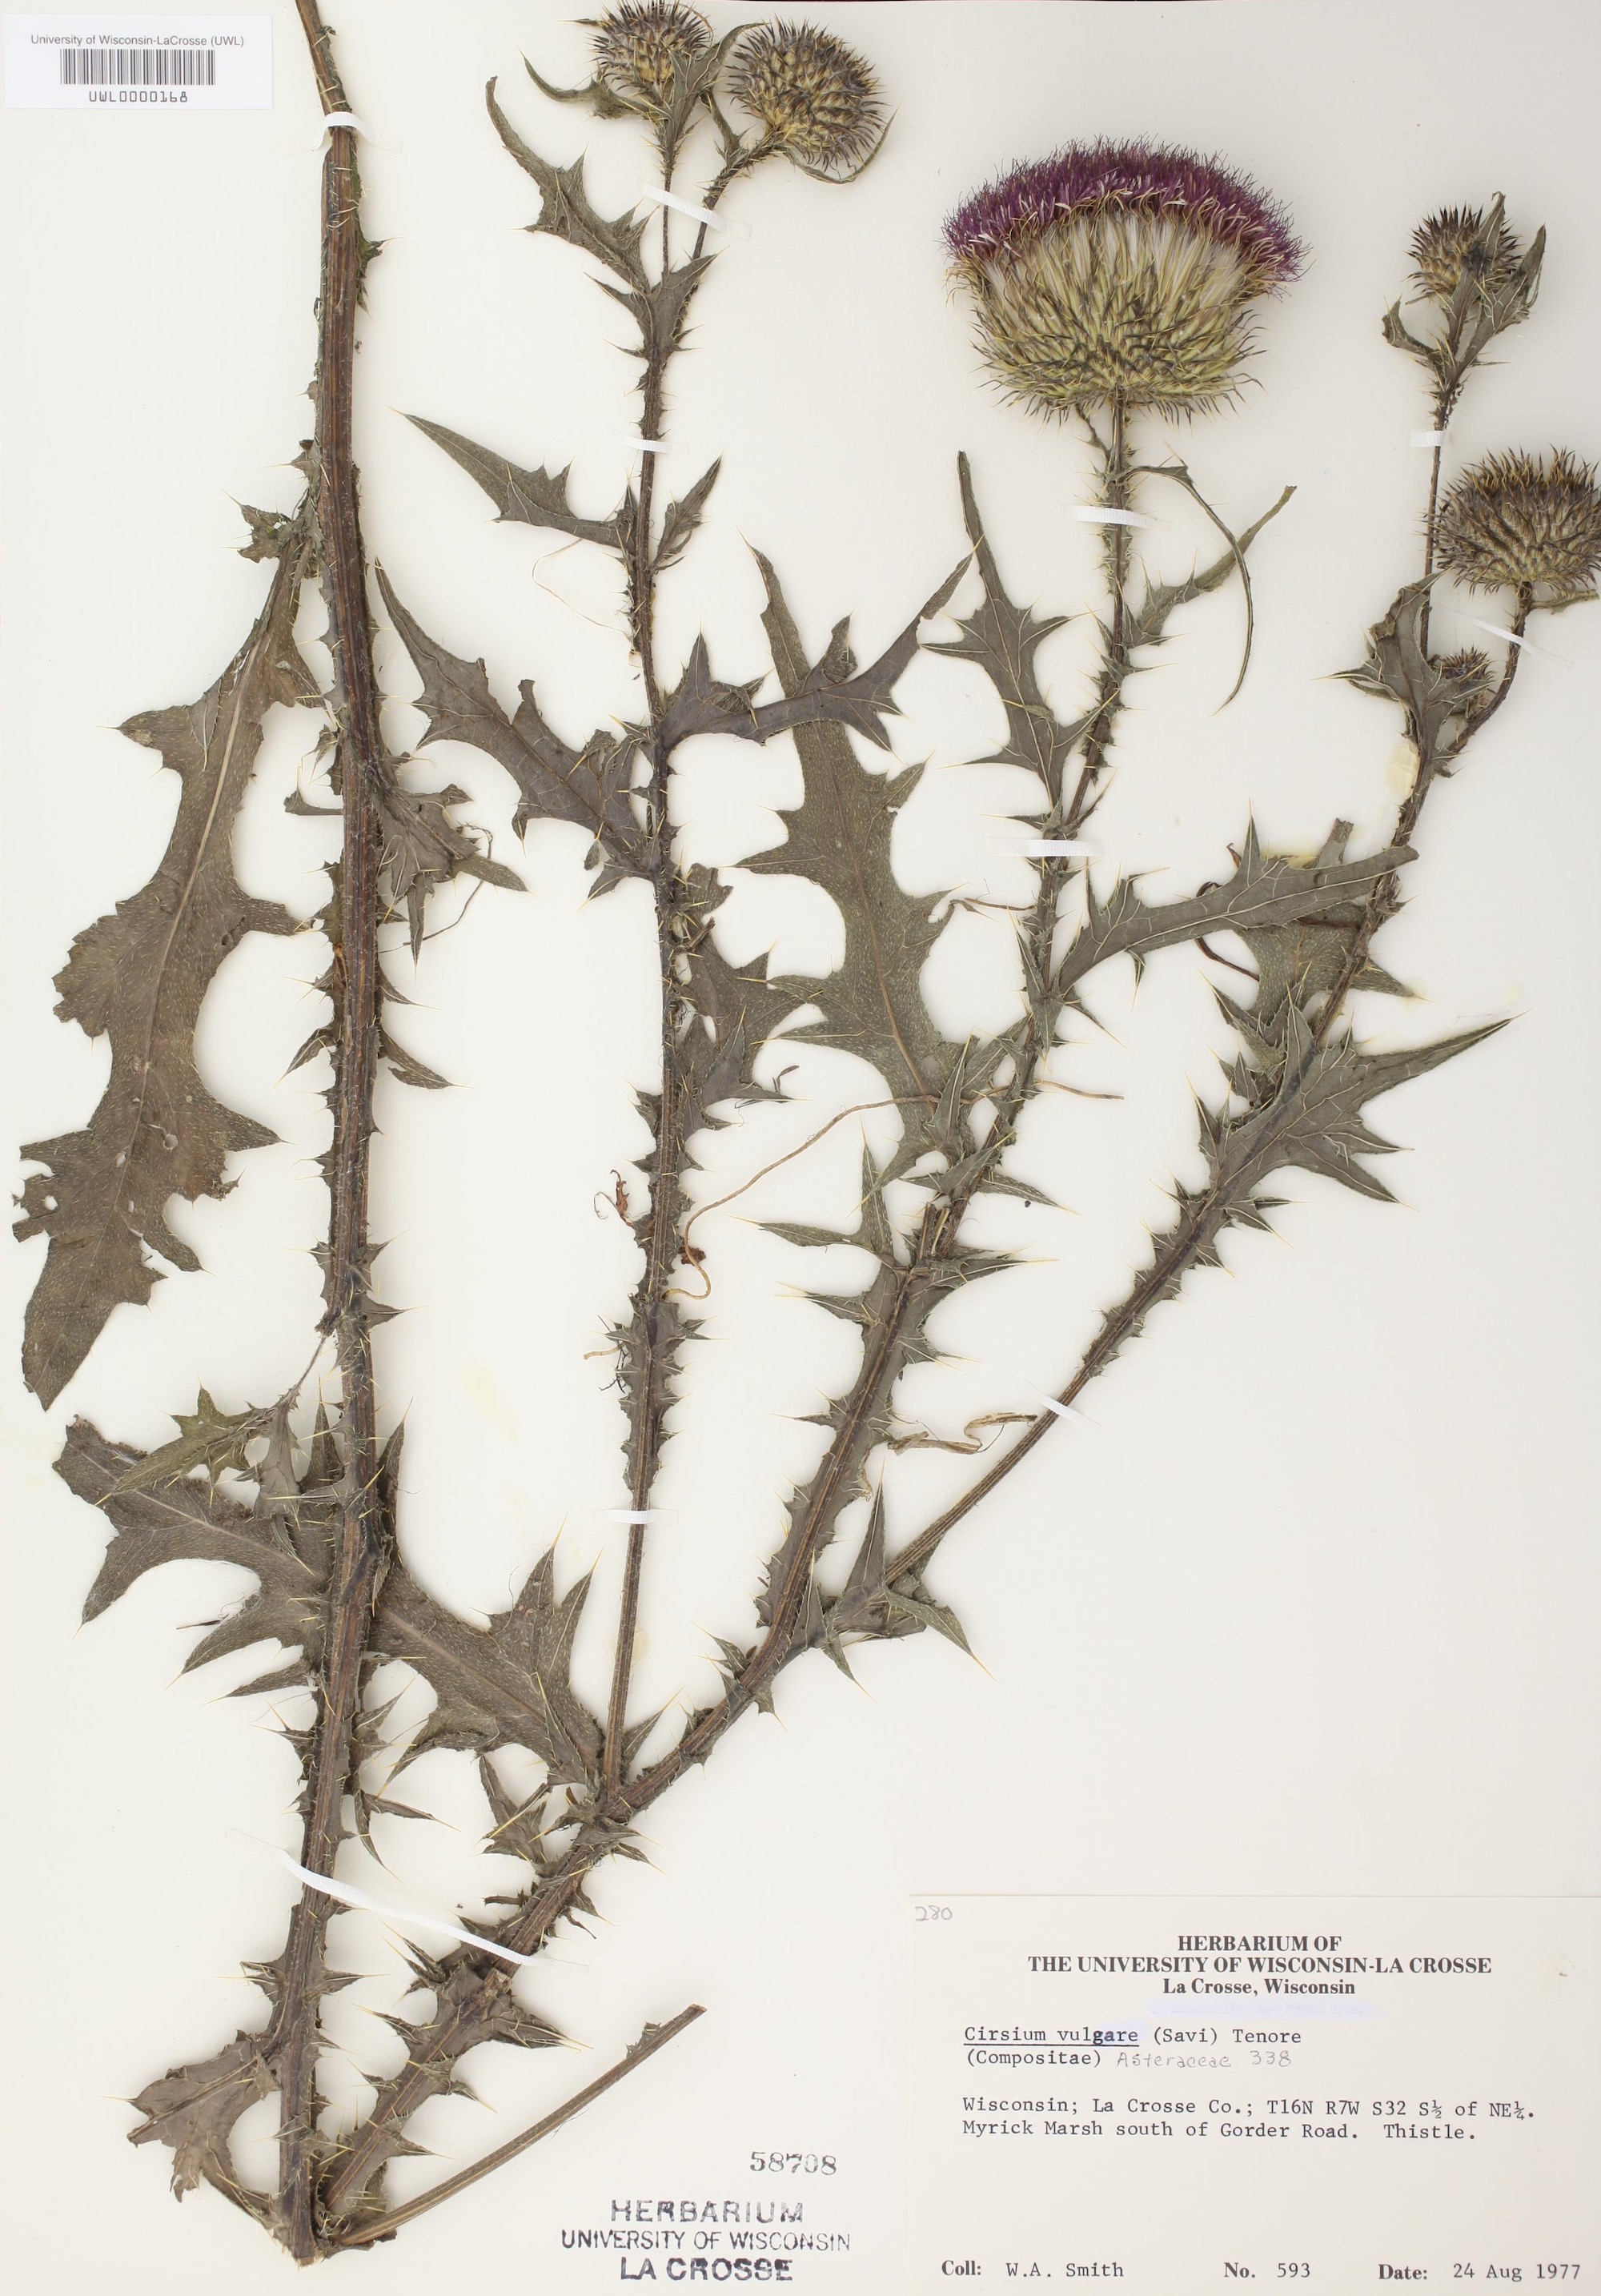 Bull Thistle specimen collected in La Crosse County, Wisconsin on August 24, 1977.